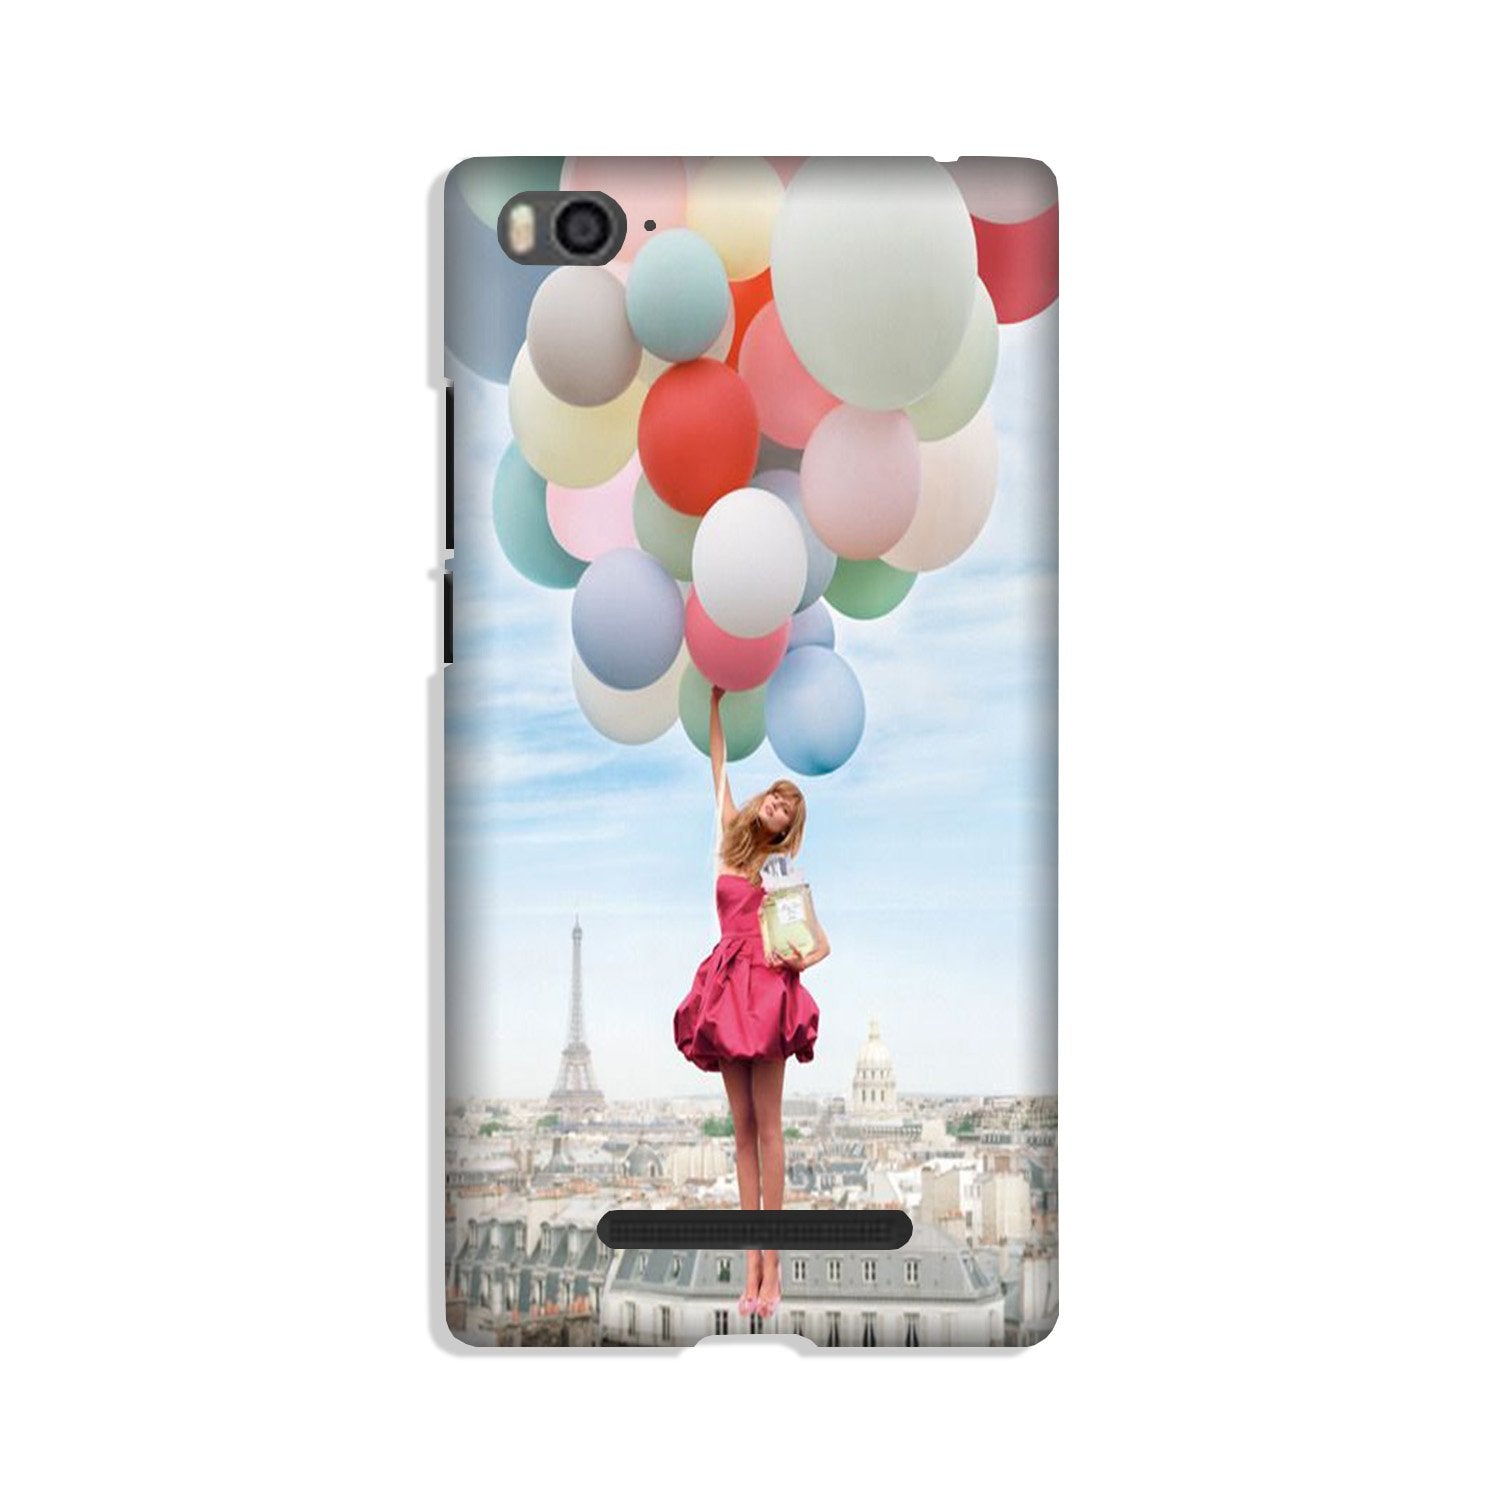 Girl with Baloon Case for Redmi 4A